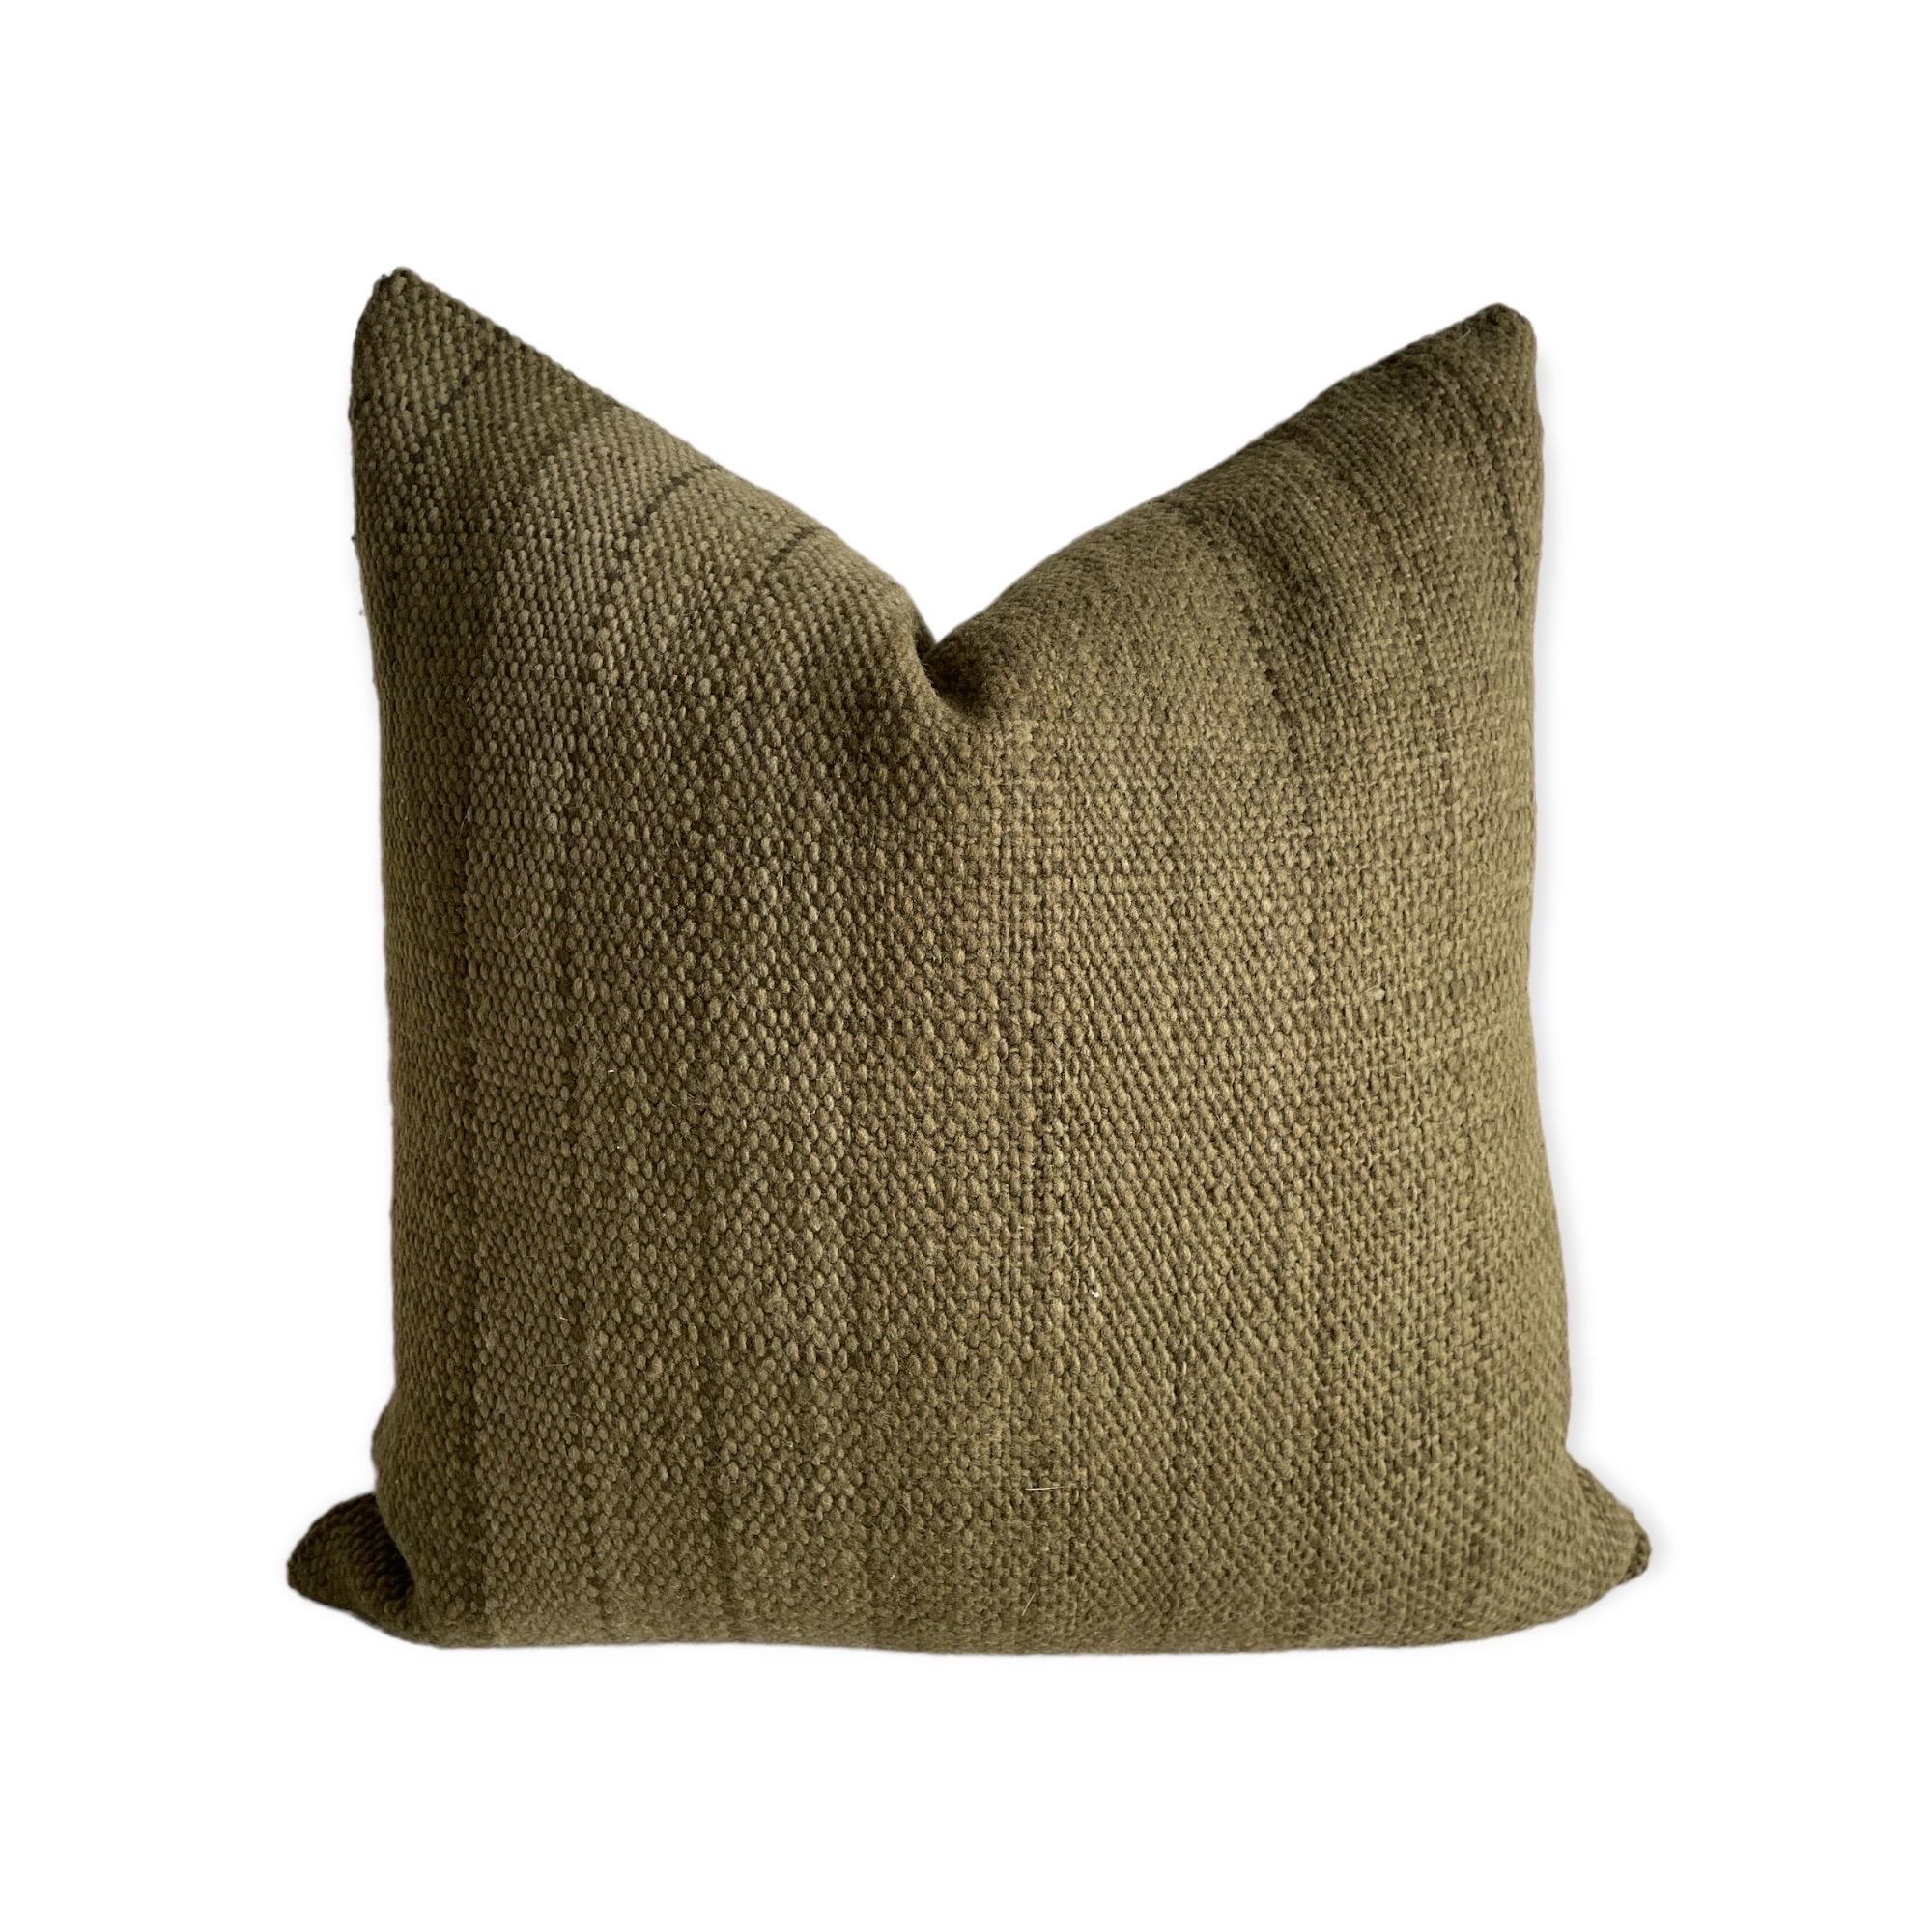 Custom Woven Wool Pillow Cover in Moss Green For Sale 1